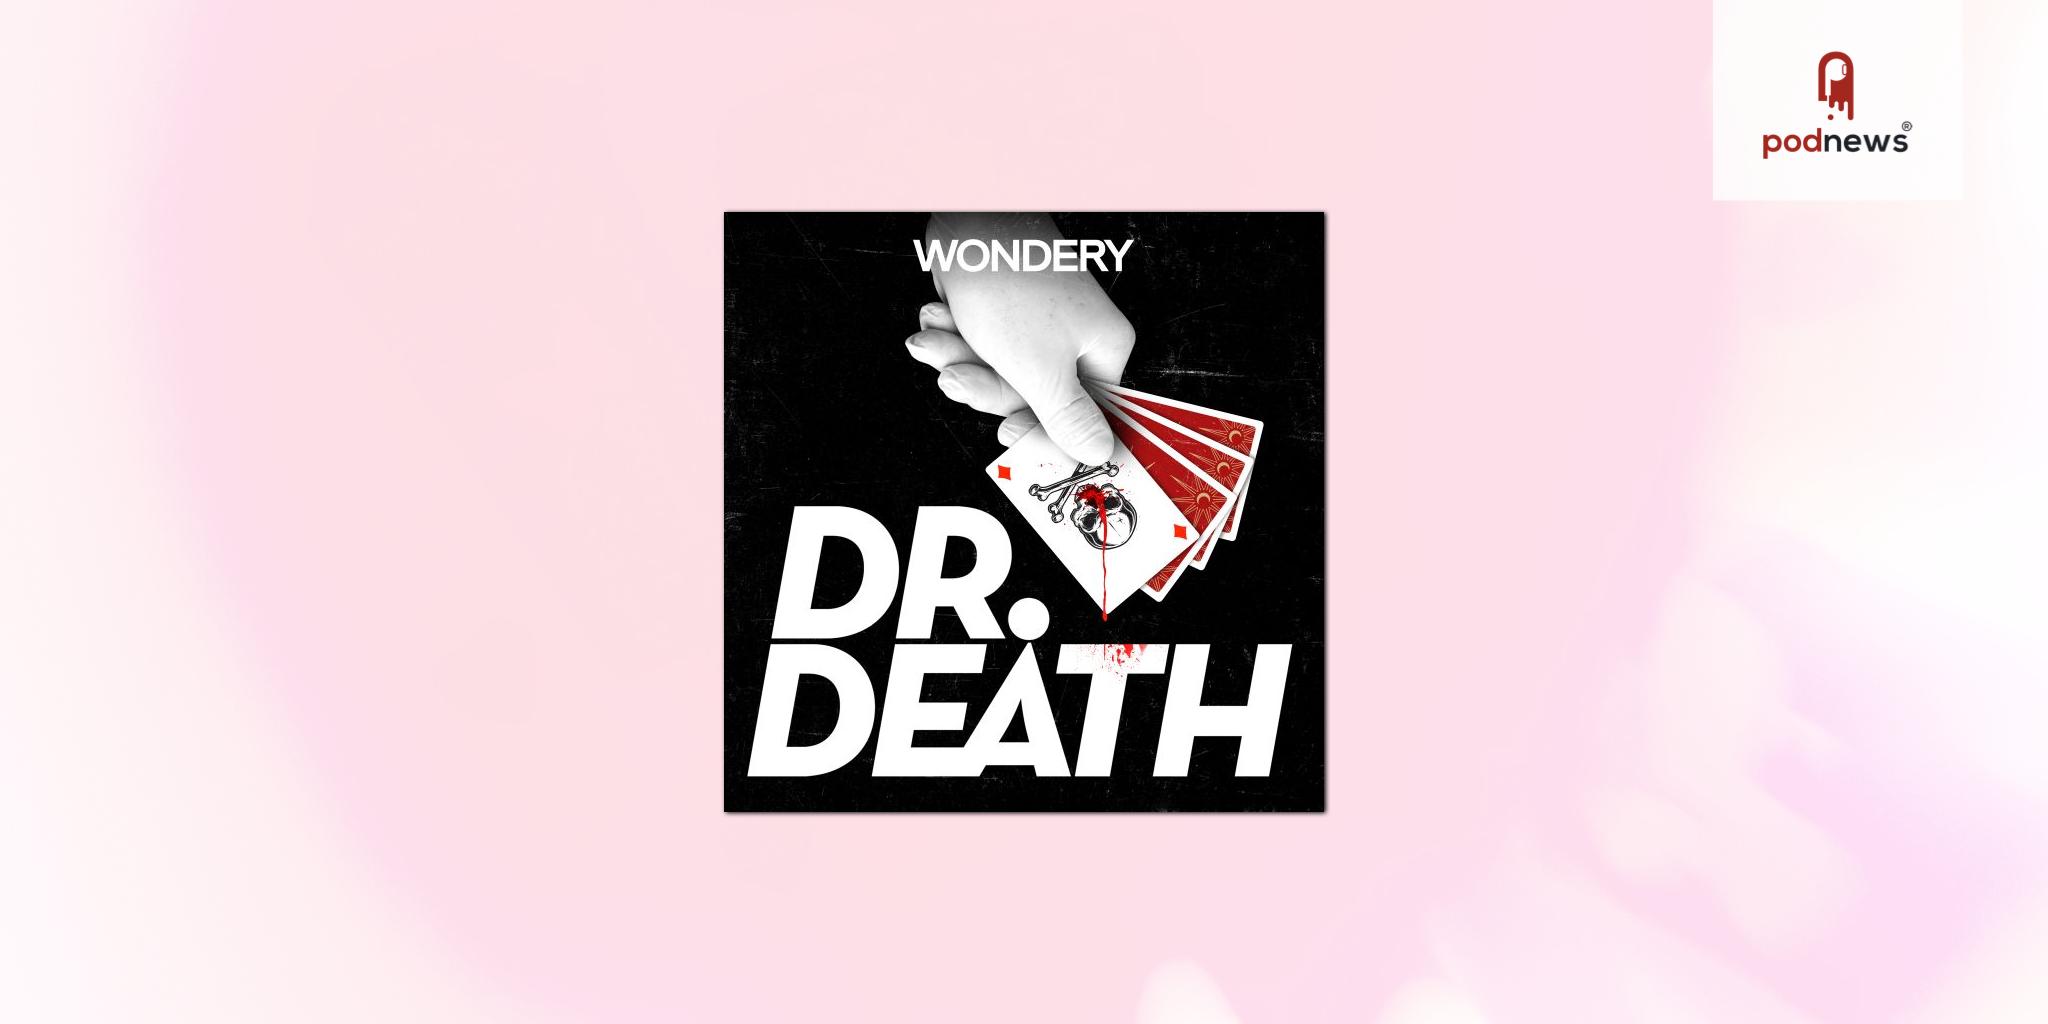 The Wondery True-Crime Anthology Podcast Dr. Death Returns for a Fourth Season